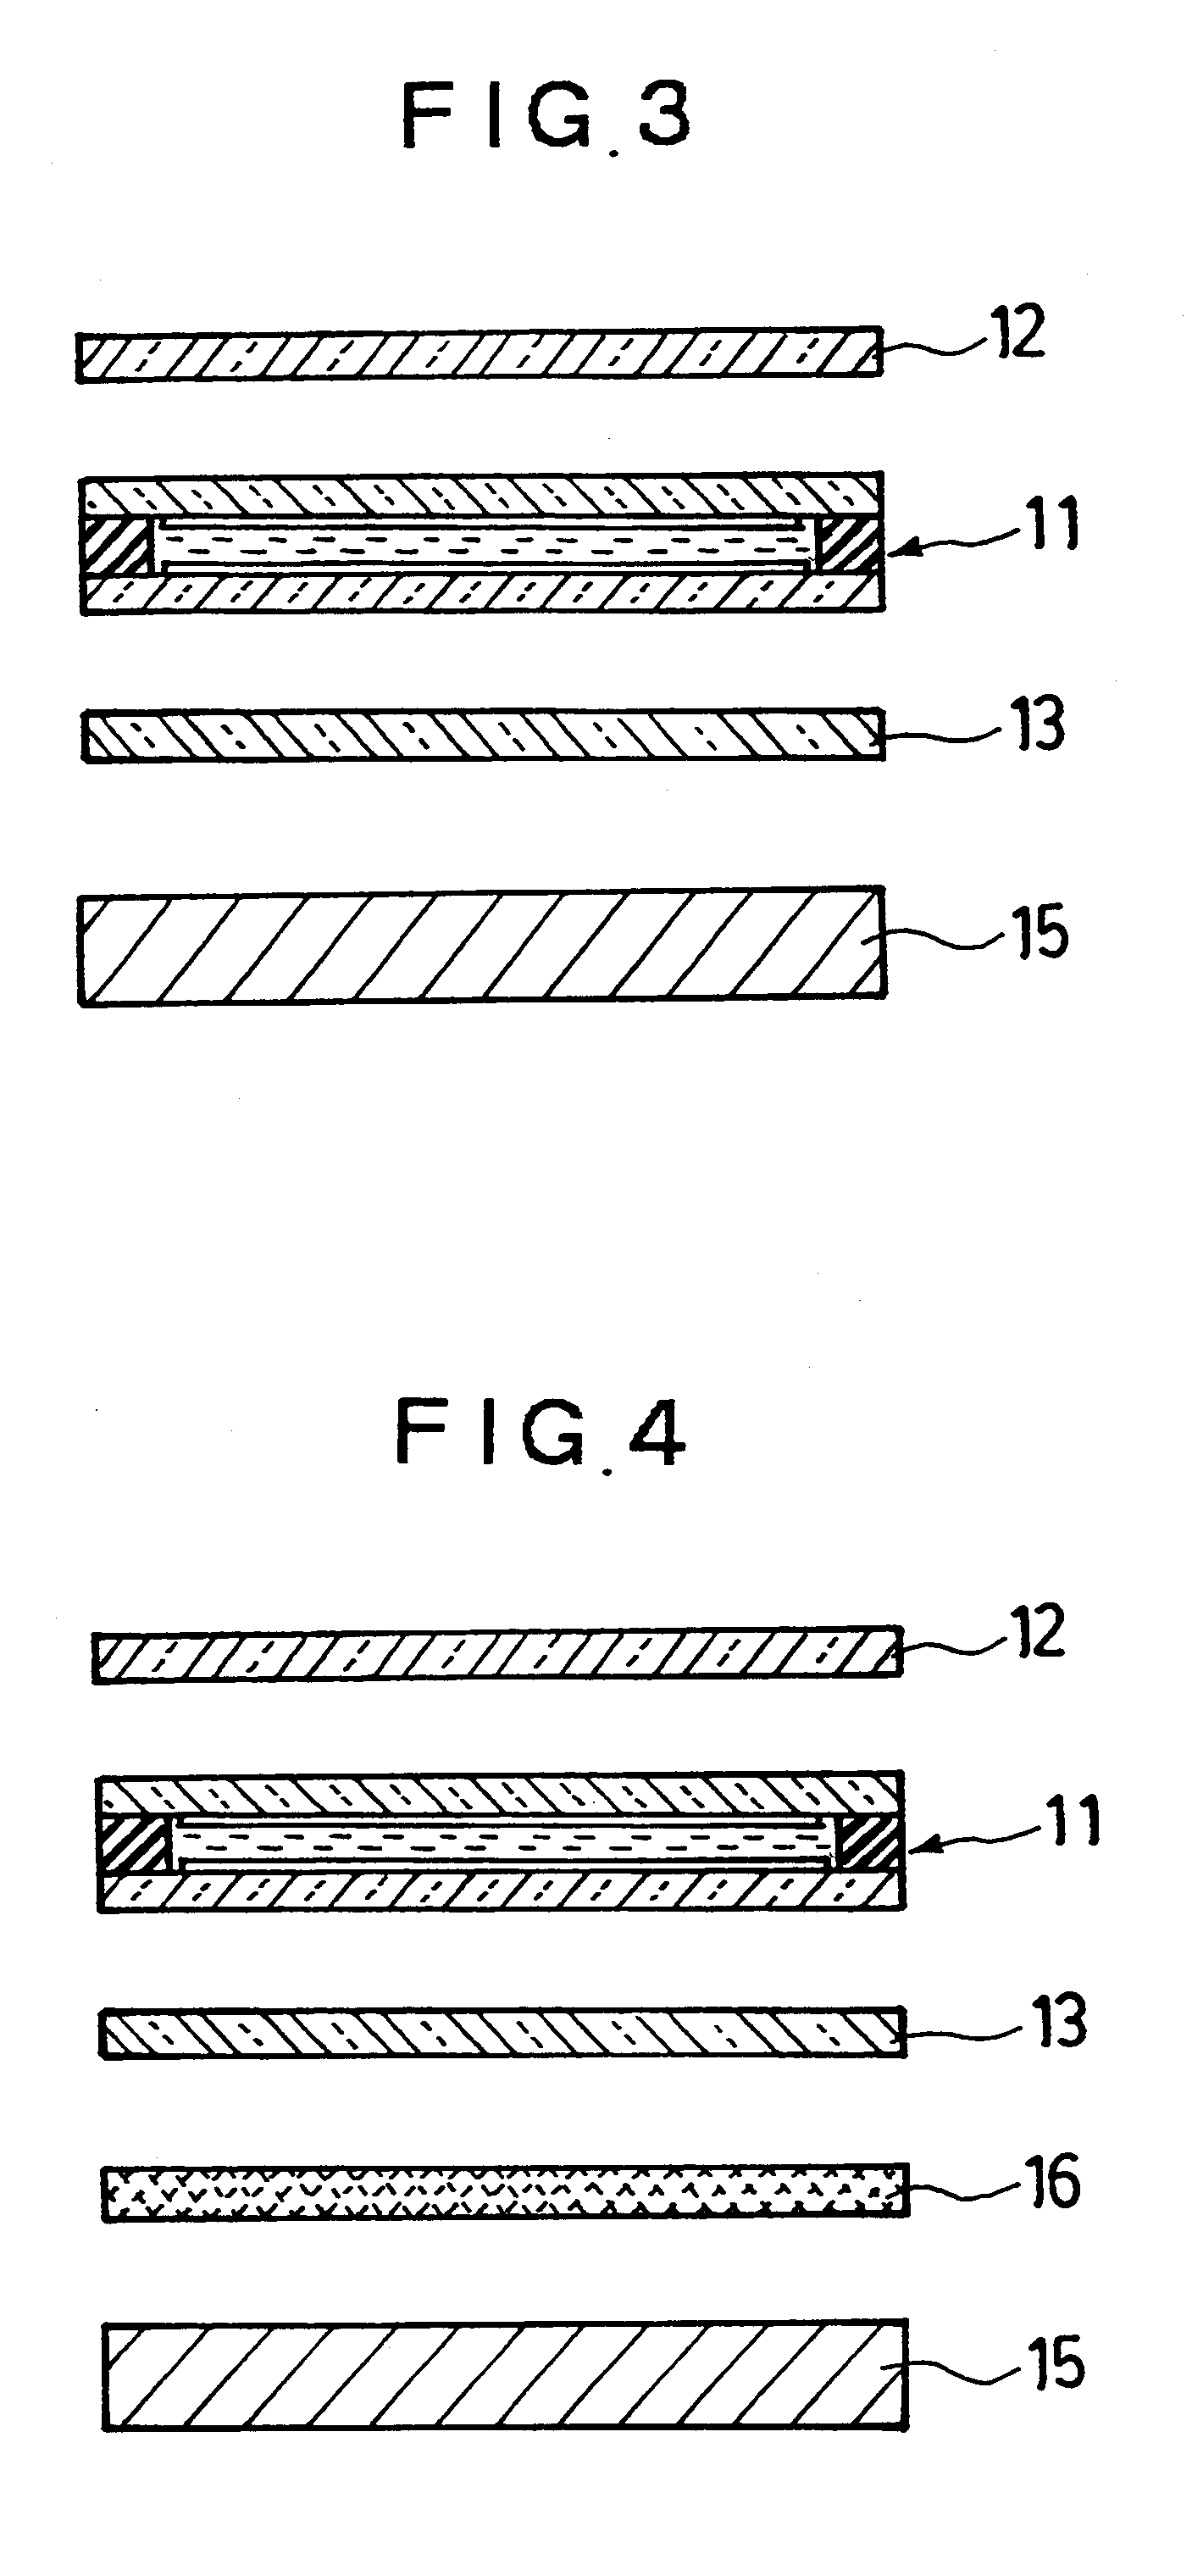 Liquid crystal display device with two reflective polarizers providing metallic appearance effects